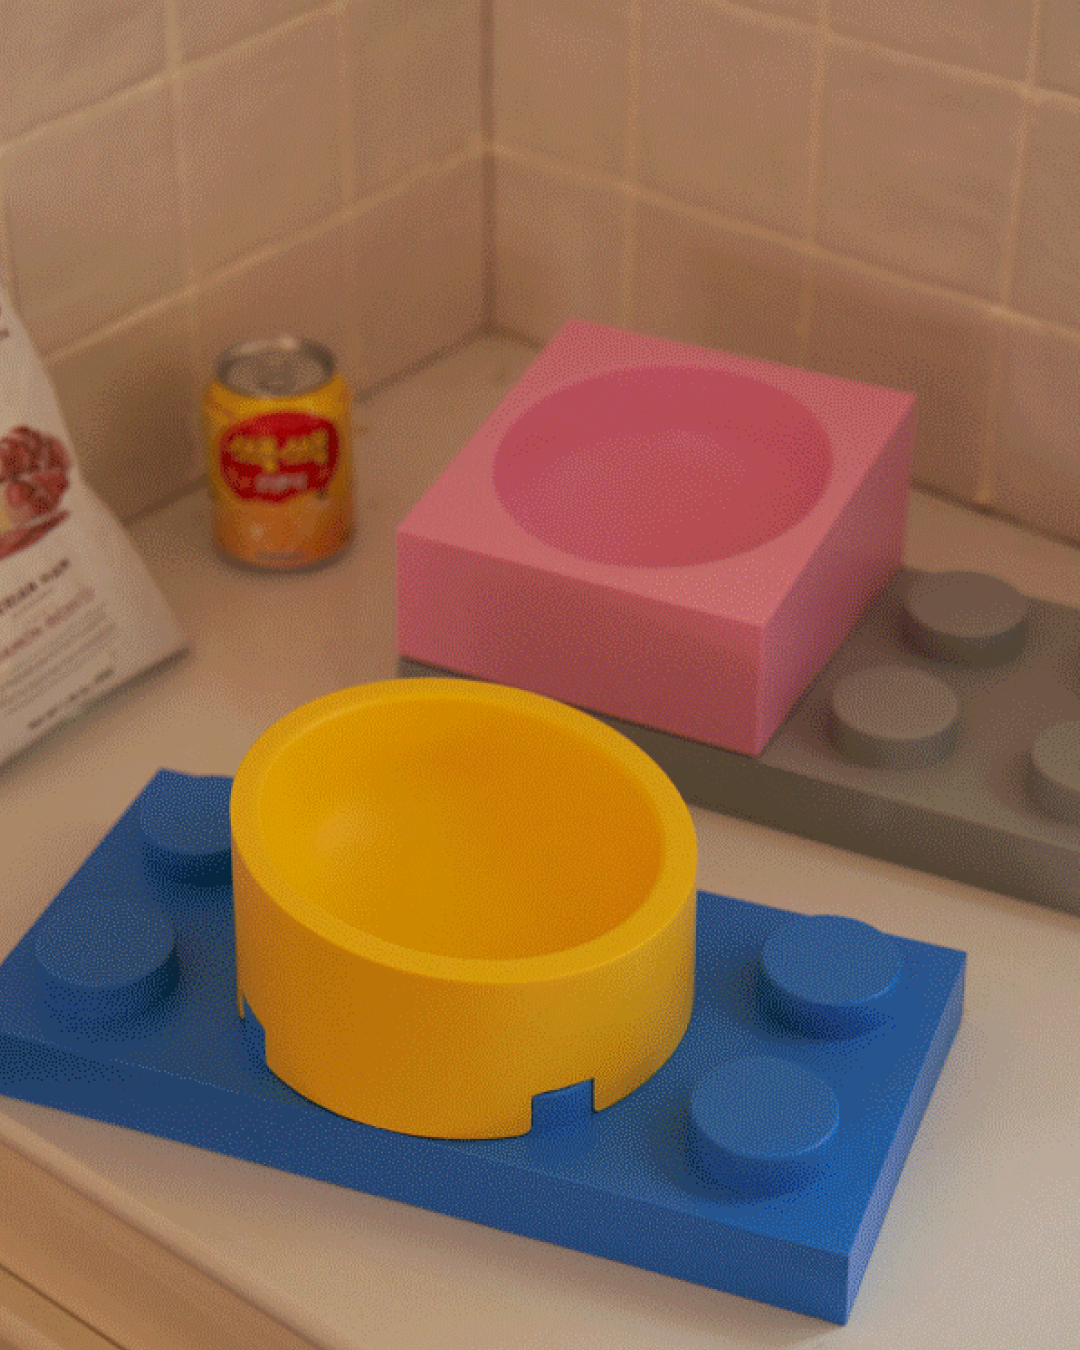 LEGO-Themed Pet Feeding Bowl for Cats - Pawscode